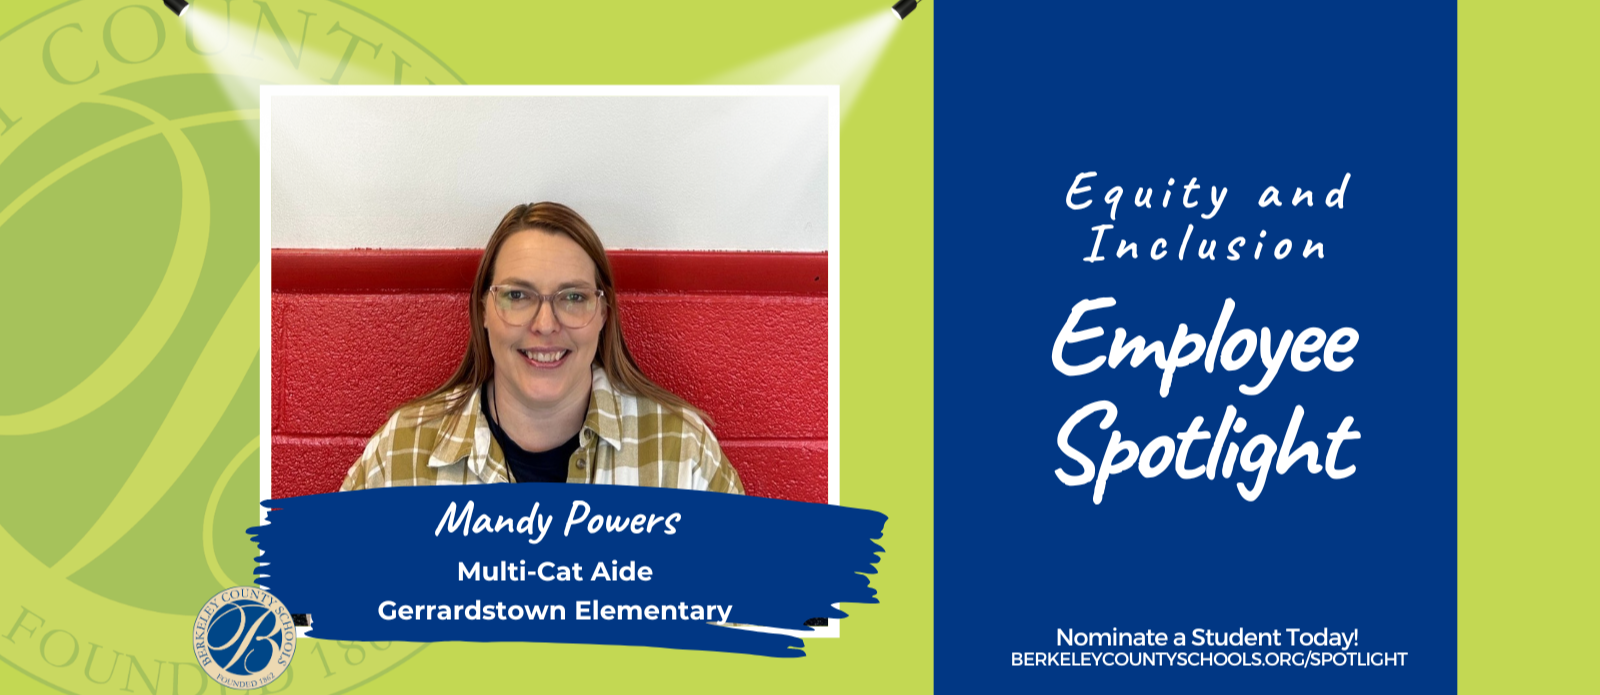 image of equity and inclusion spotlight featuring mandy powers, a 1st grade teacher at gerrardstown elementary